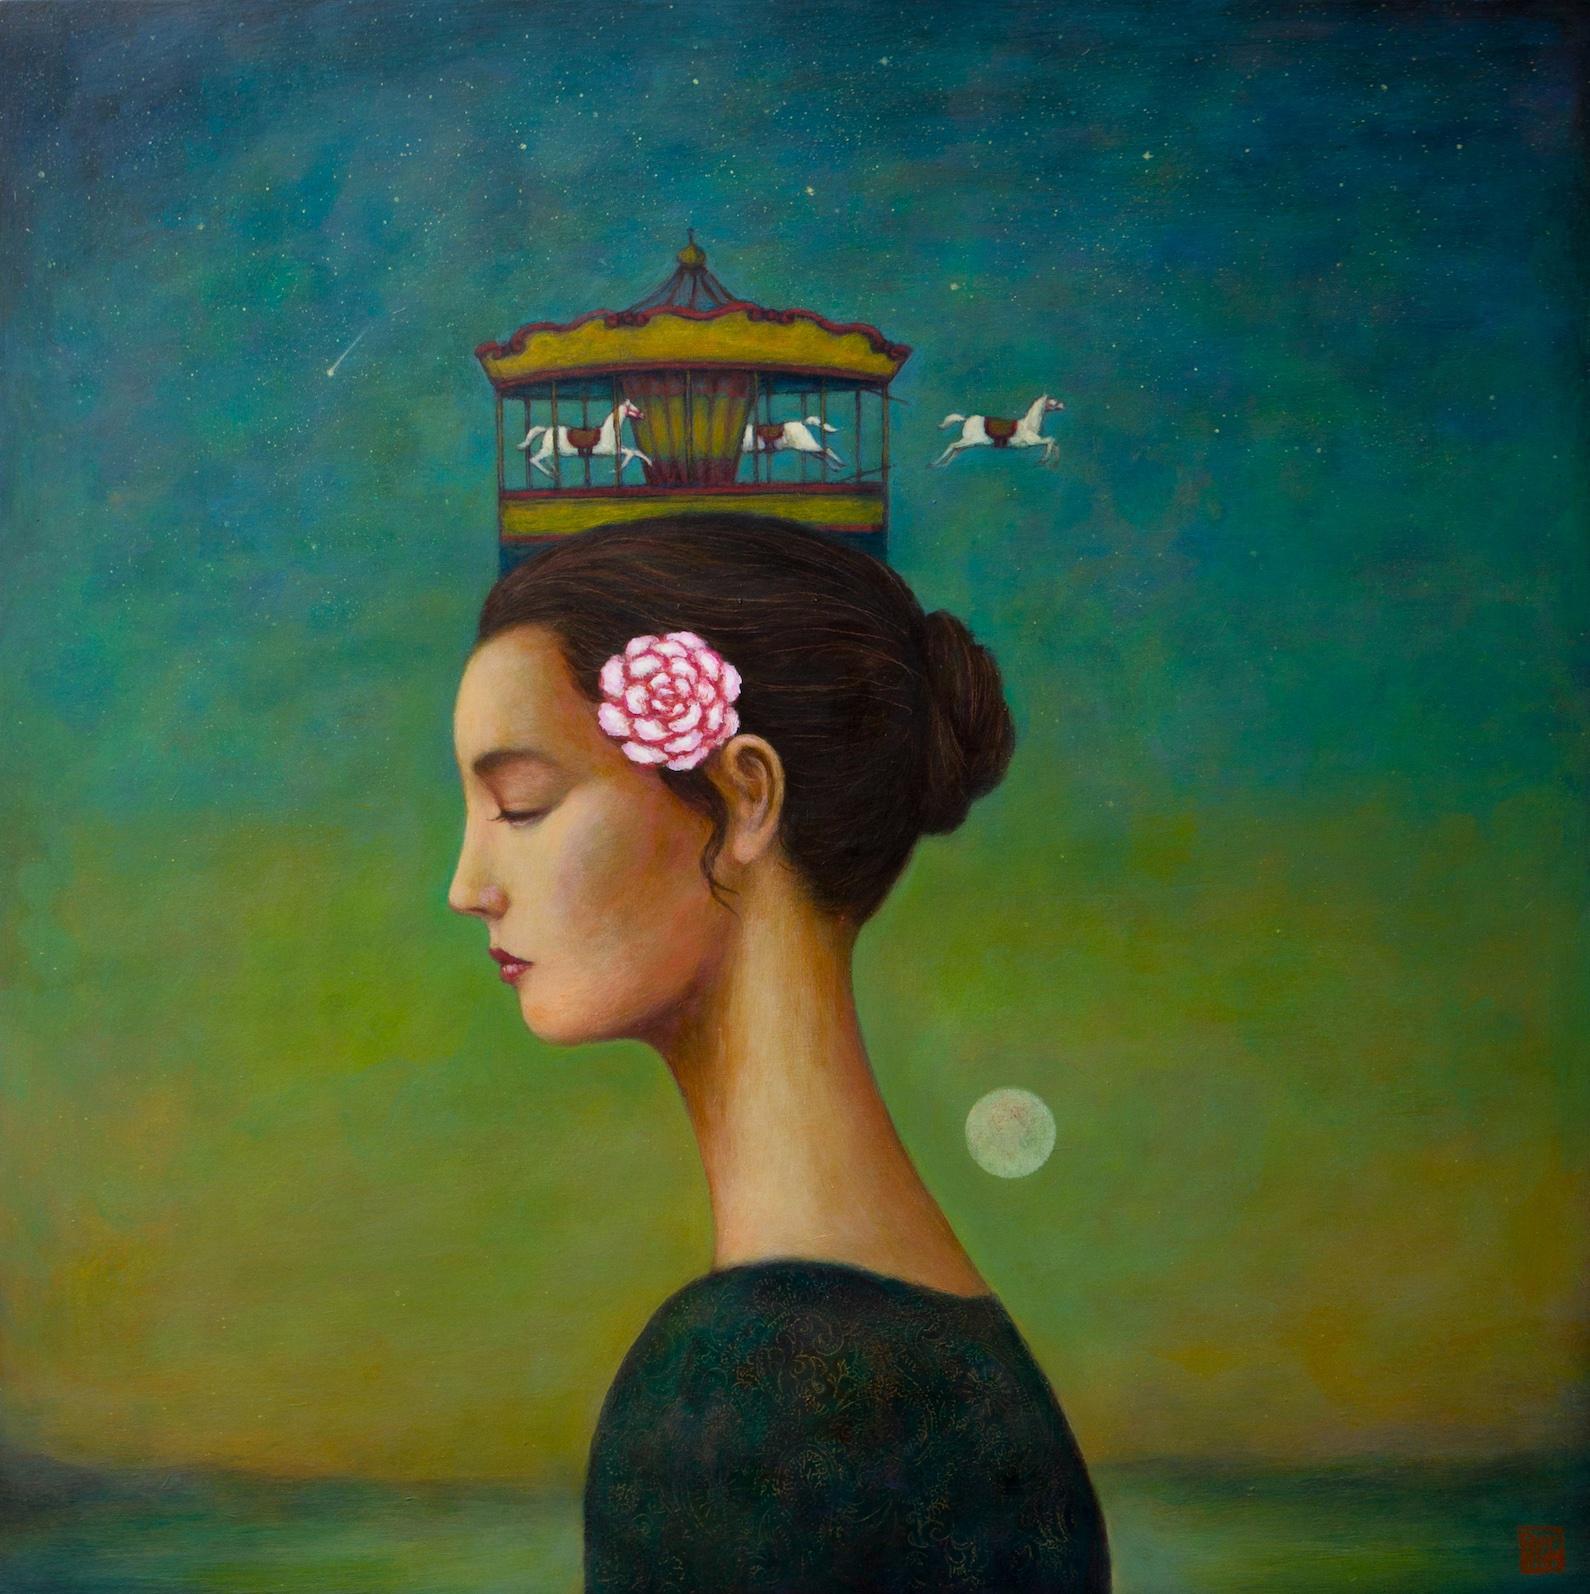 Duy Huynh Figurative Painting - "Sweet Unrest", Acrylic on Wood Panel, Fictional Skyscape, Human Figure